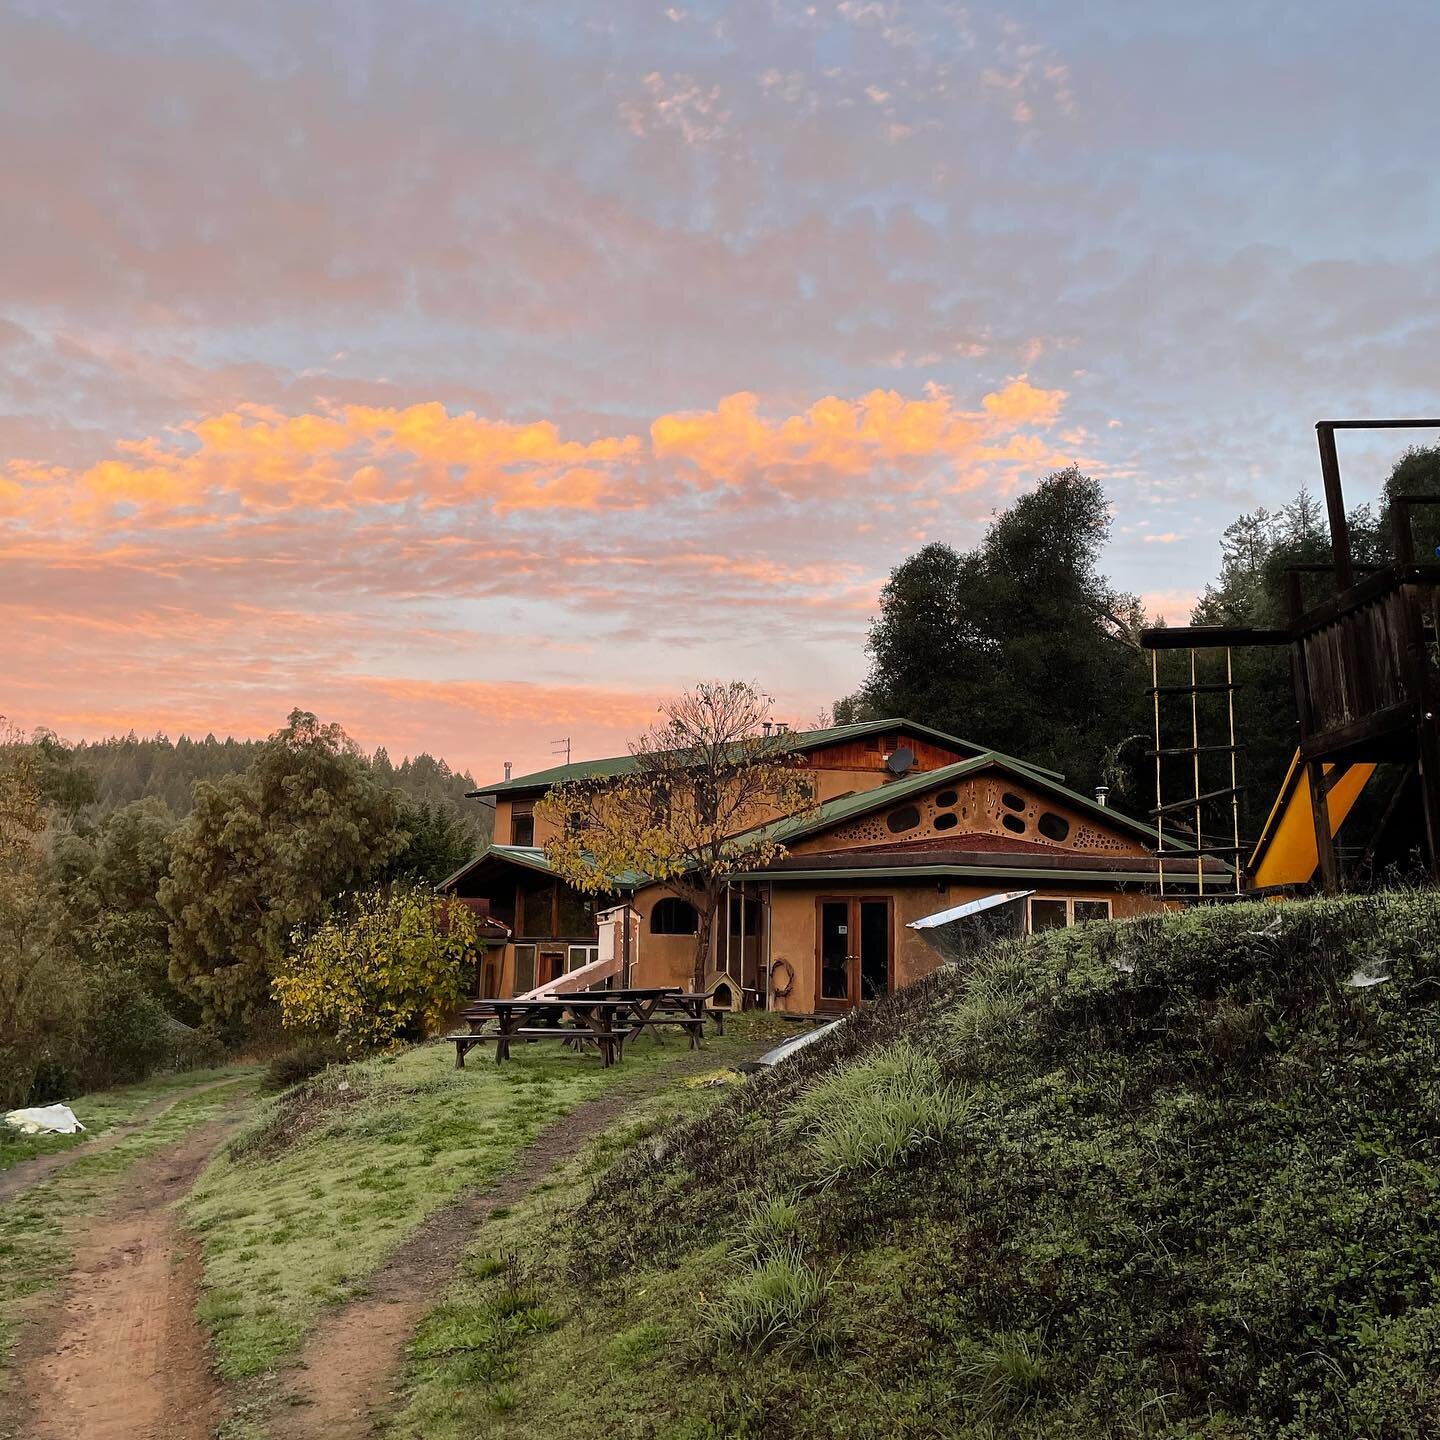 #fallinmendocino 
#fallinmendocinocounty 
#norcalsky 
#intentionalcommunitybuilding 
#intentionalcommunitylife 
#commonhouse 
#earthenbuilding 
#centerforlearning

A snap shot of our beautiful dot on this beautiful planet with a sky that reminds us o